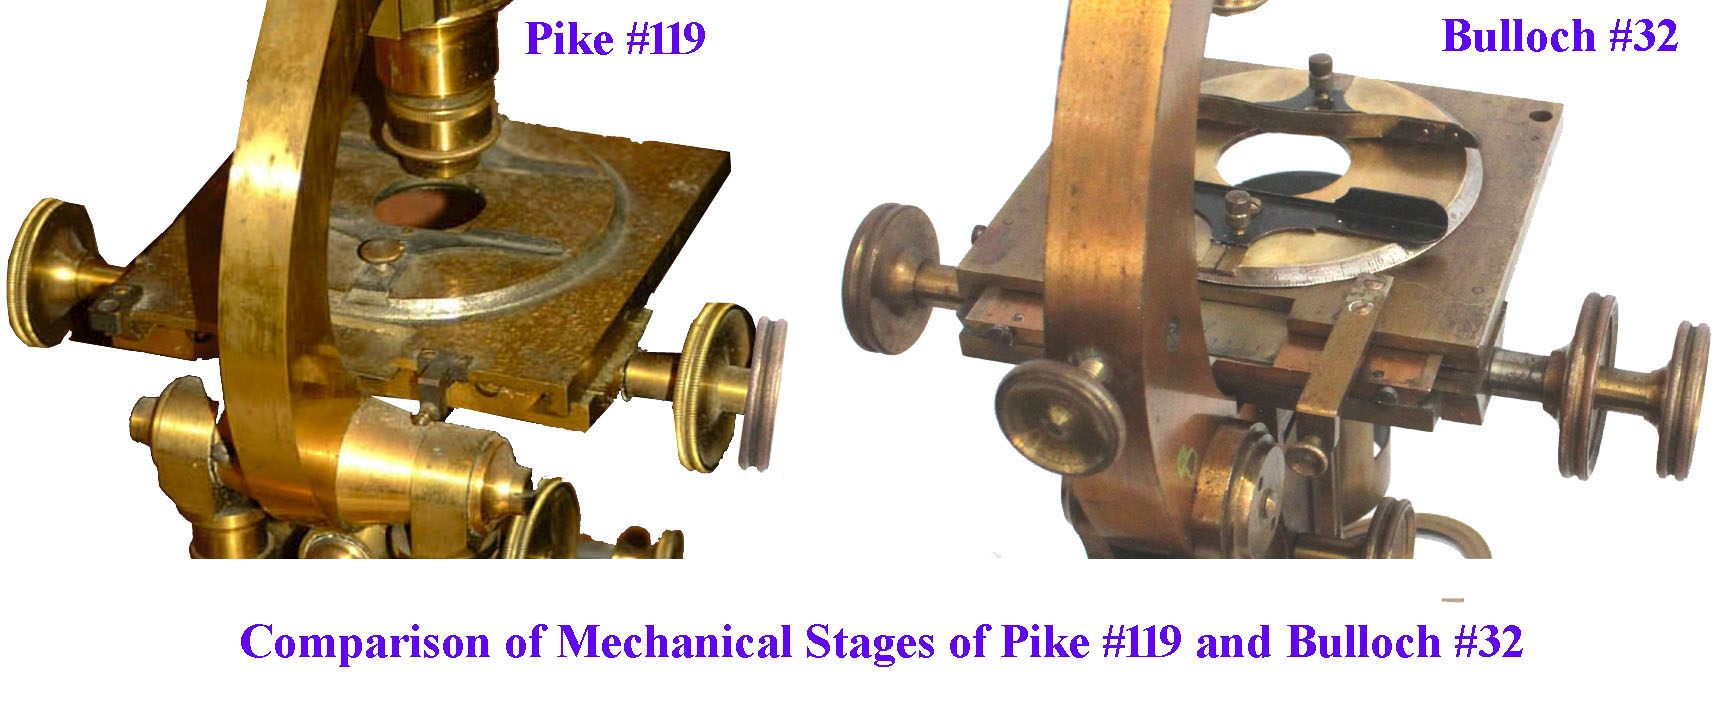 compared stages of Pike and Bulloch